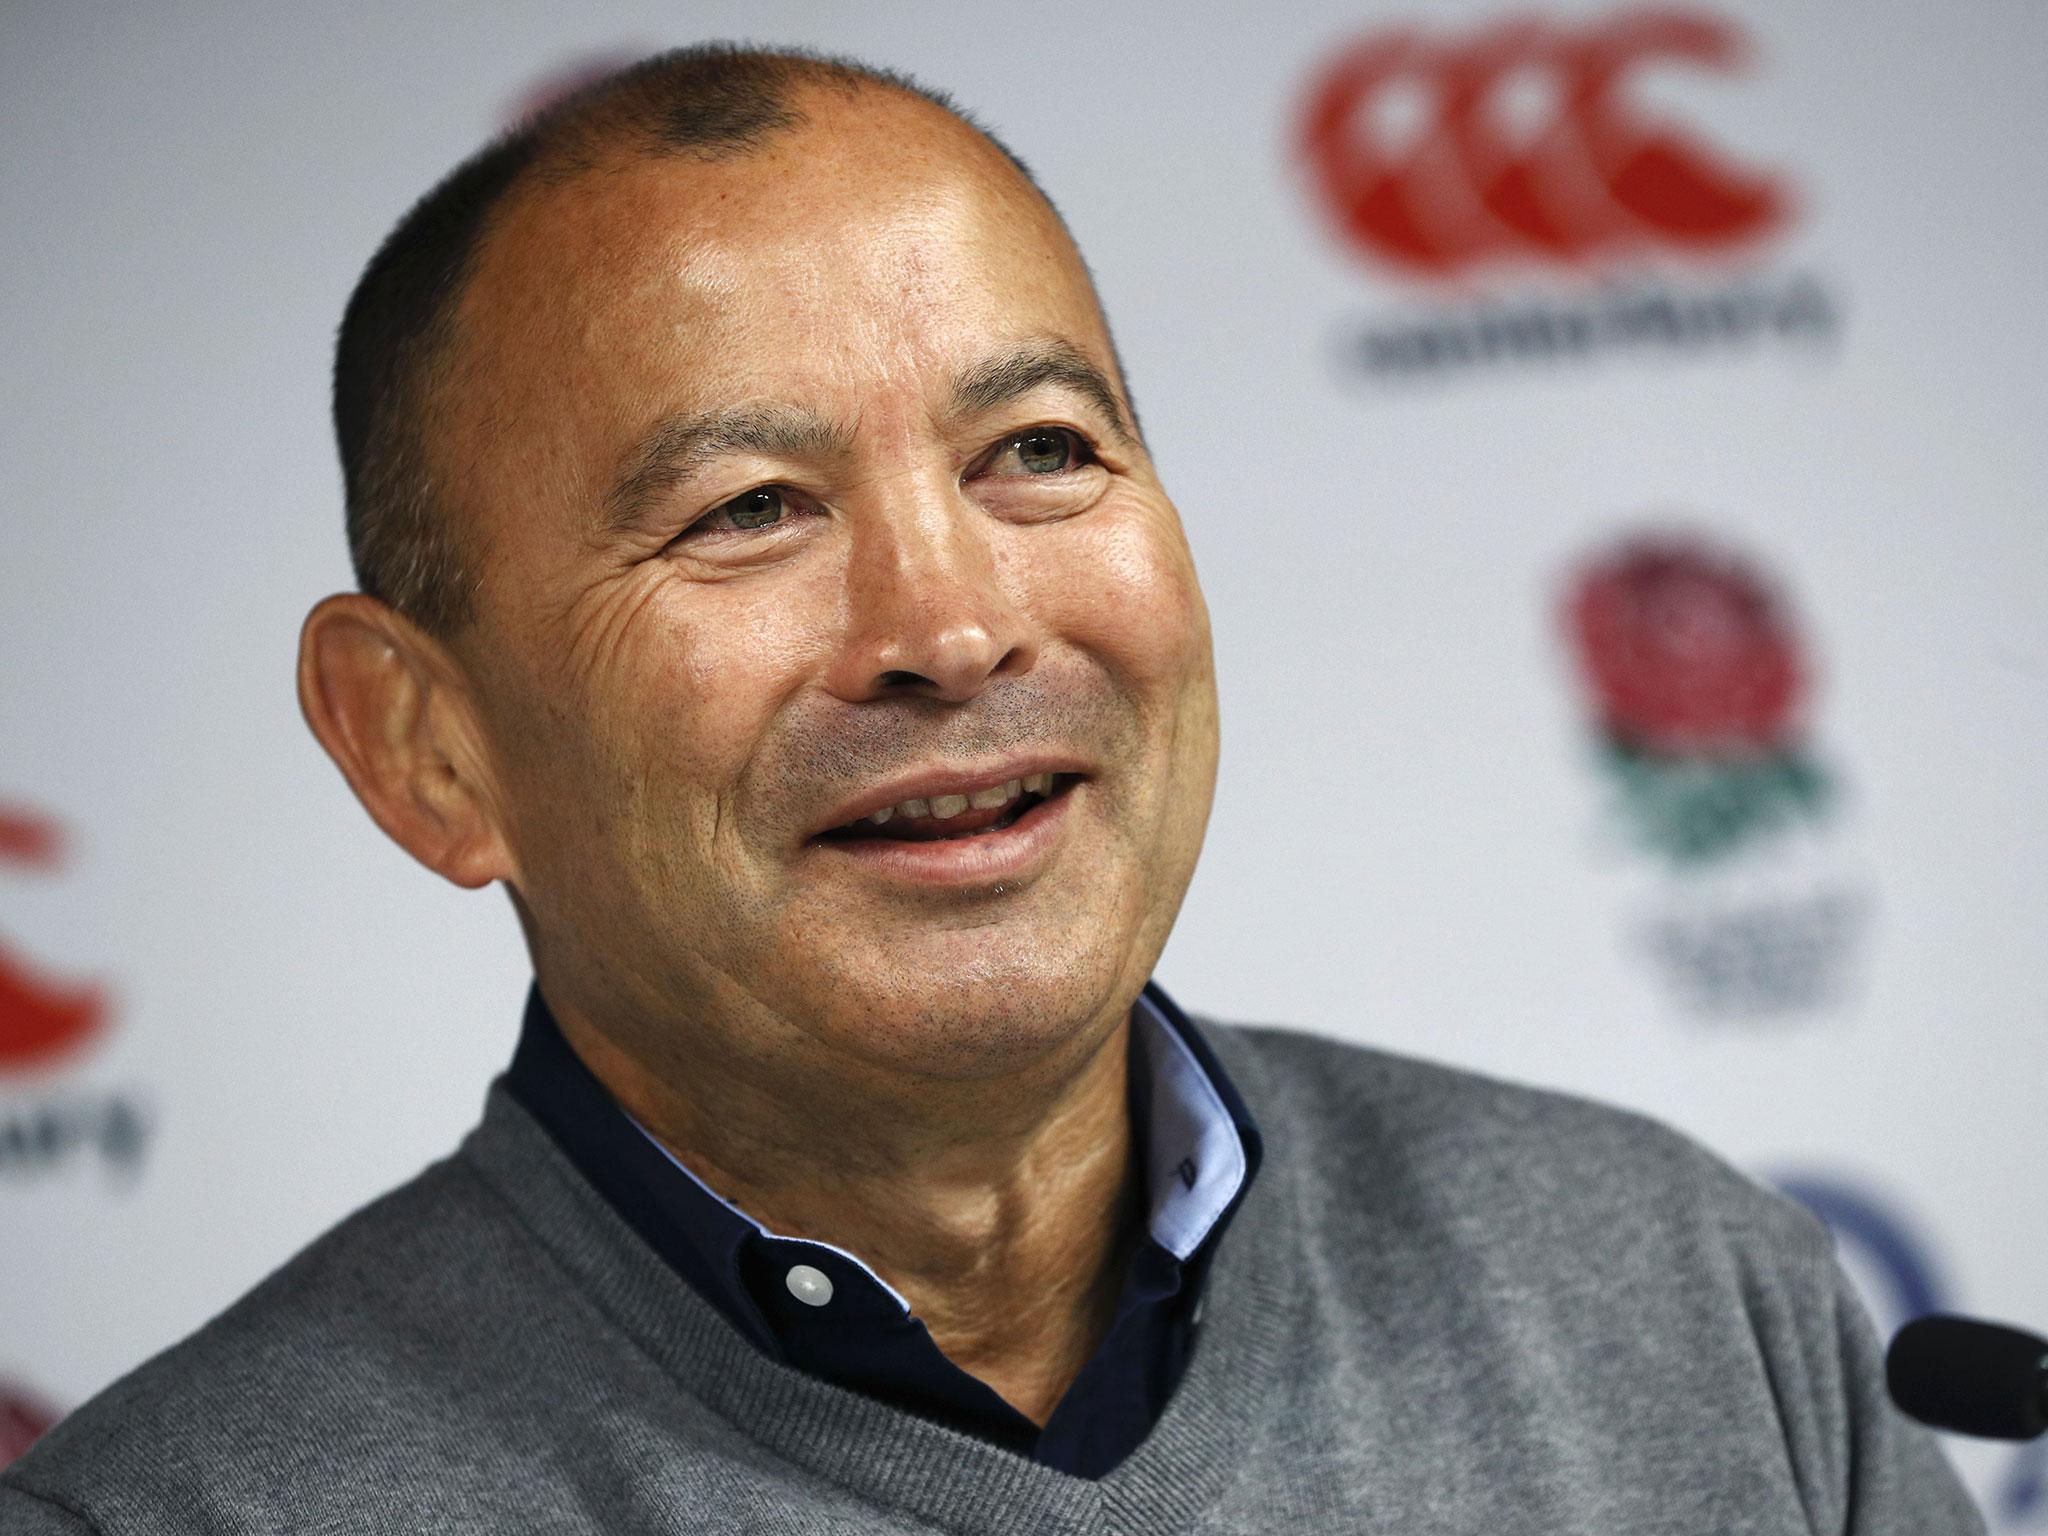 England head coach Eddie Jones wants to build his leadership core to provide alternatives to captain Dylan Hartley